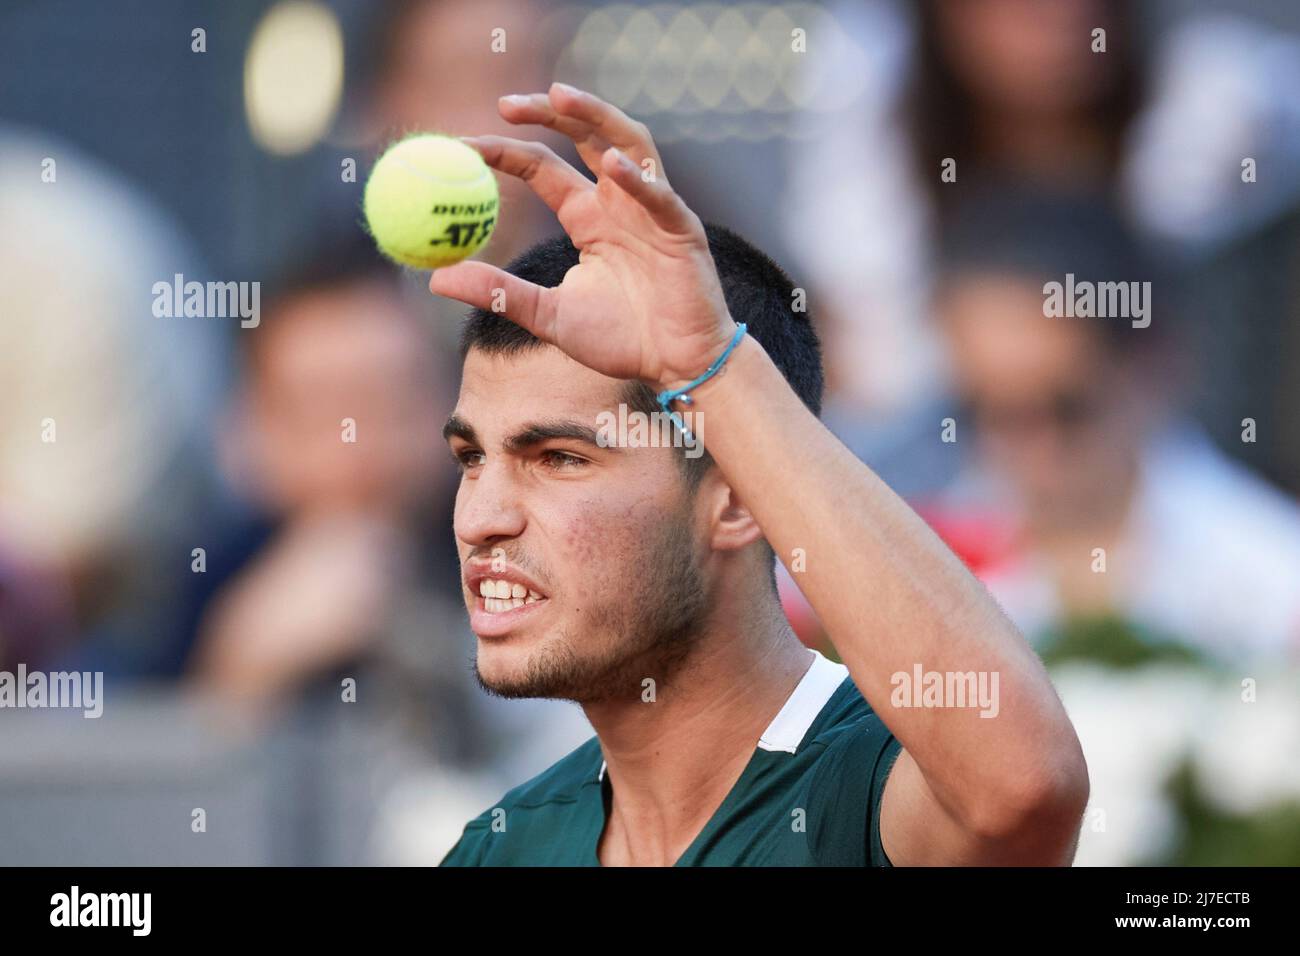 MADRID, May 9, 2022 (Xinhua) -- Carlos Alcaraz of Spain reacts during the men's singles final against Alexander Zverev of Germany at the Madrid Open in Madrid, Spain, May 8, 2022. (Xinhua/Meng Dingbo) Stock Photo